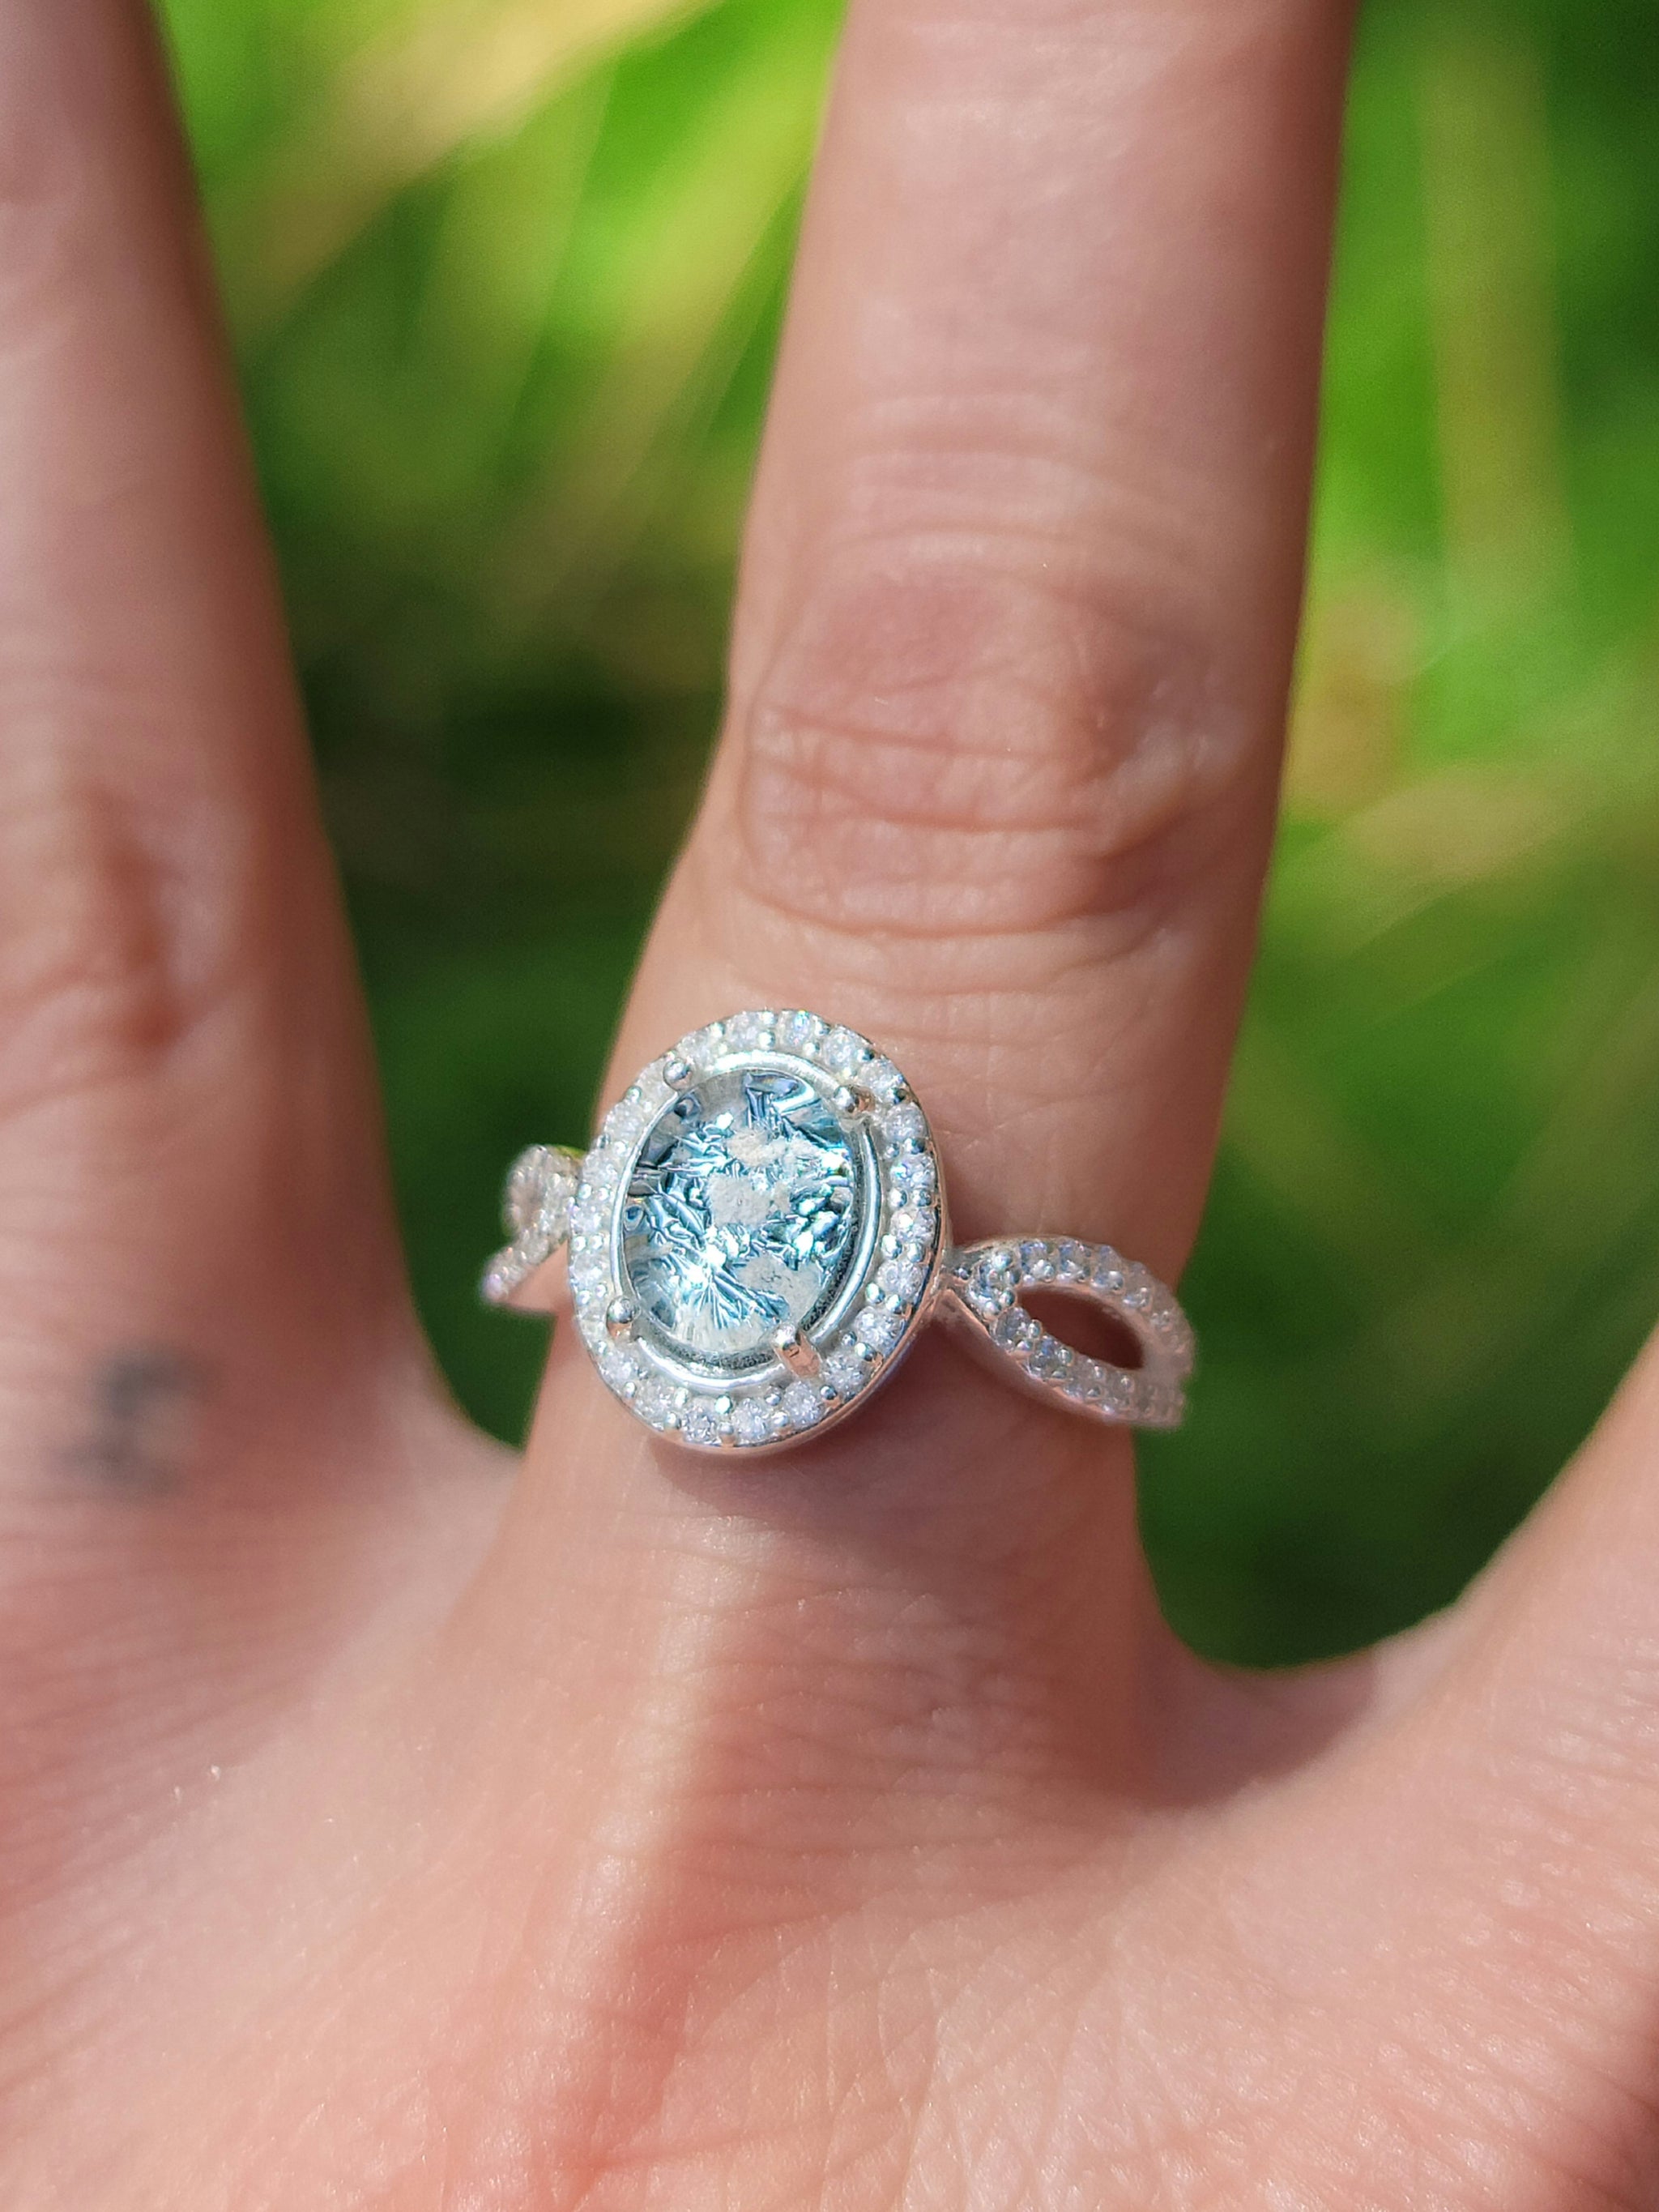 Cubic Zirconia vs. Diamond: What's the Difference? - Brilliant Earth